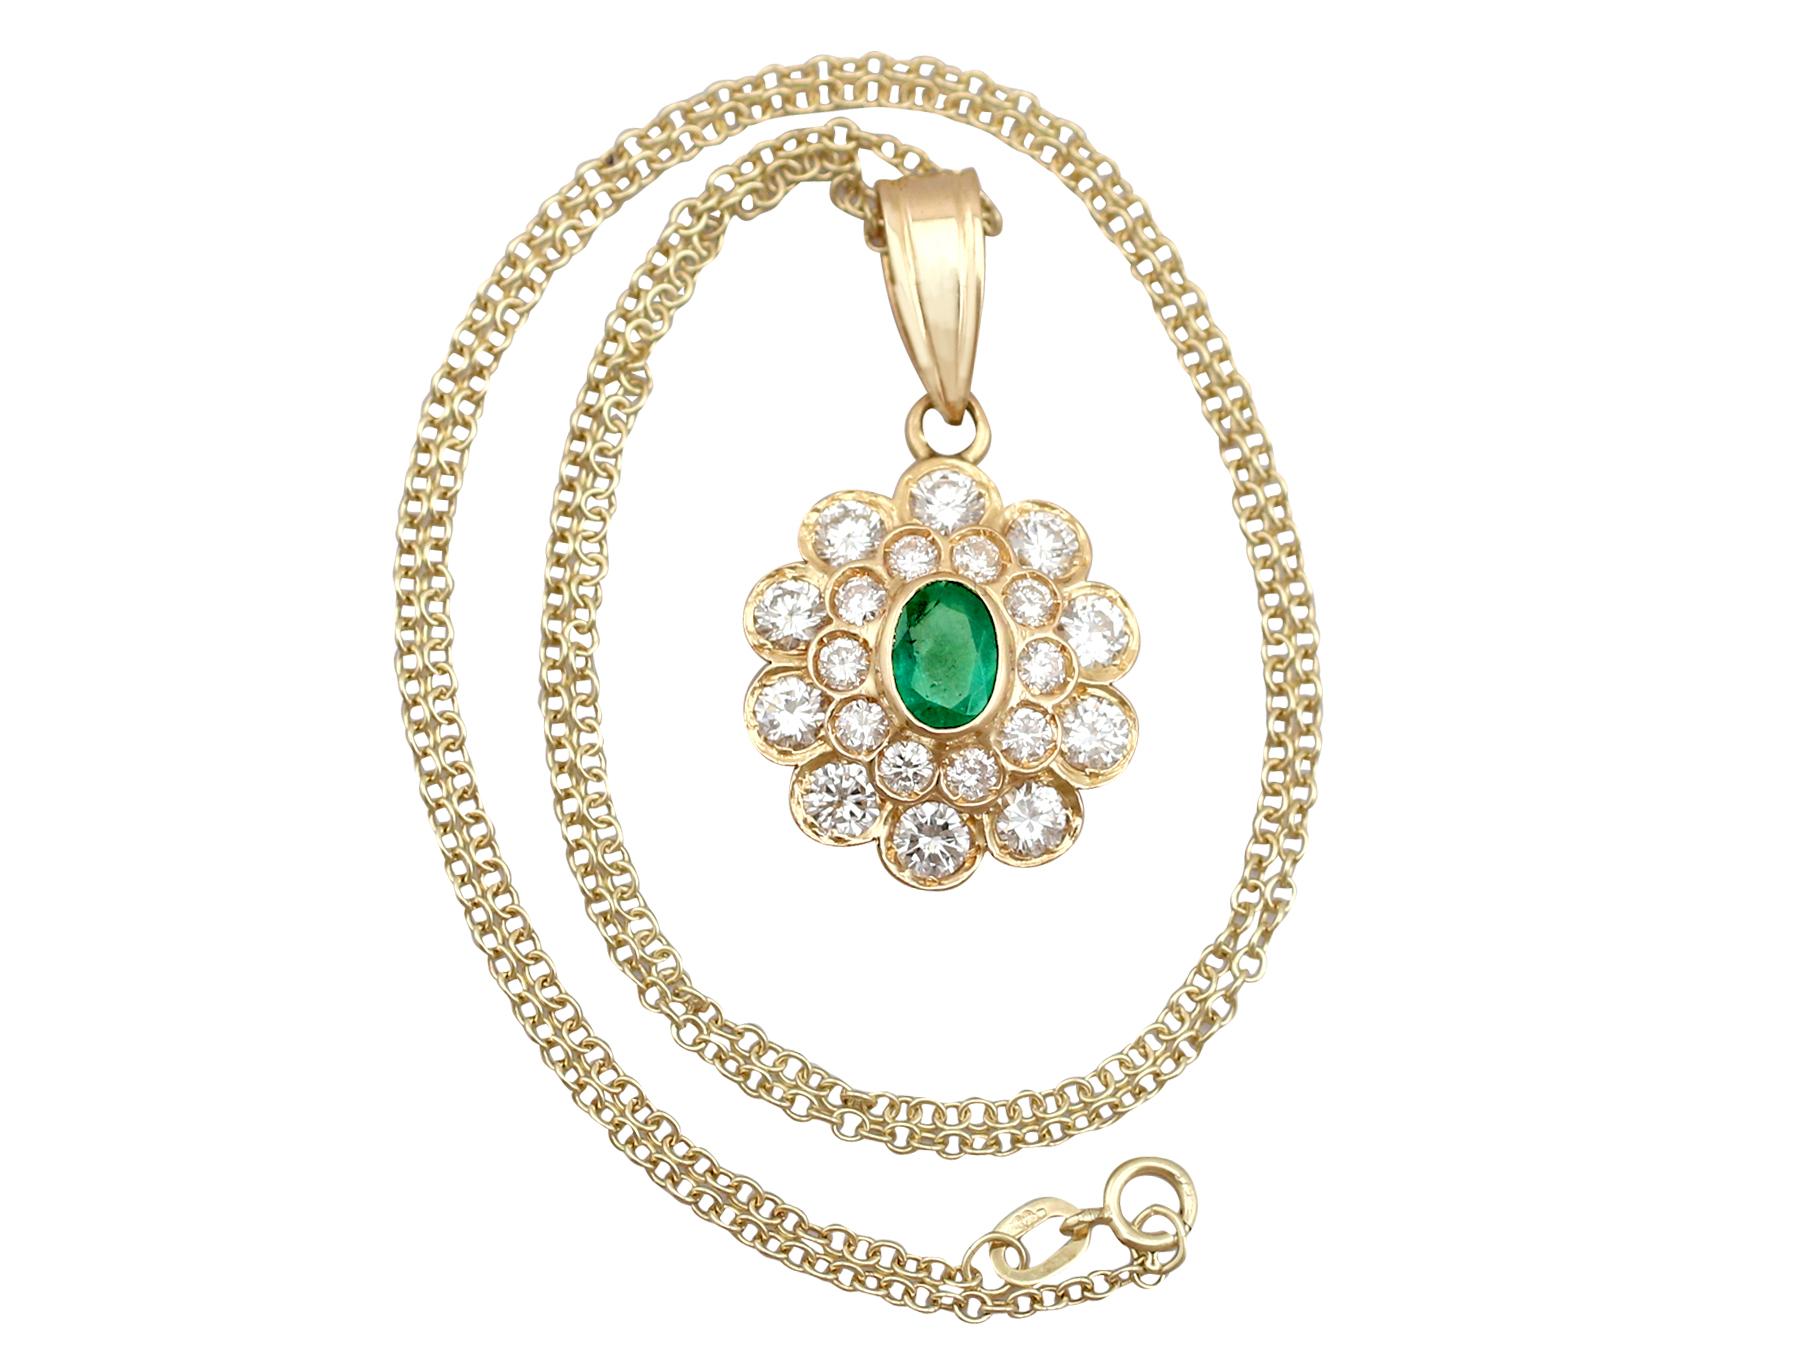 A stunning, fine and impressive vintage 0.60 carat natural emerald and 2.28 carat diamond, 18 karat yellow gold pendant; an addition to our vintage jewelry and estate jewelry collections.

This stunning vintage emerald pendant has been crafted in